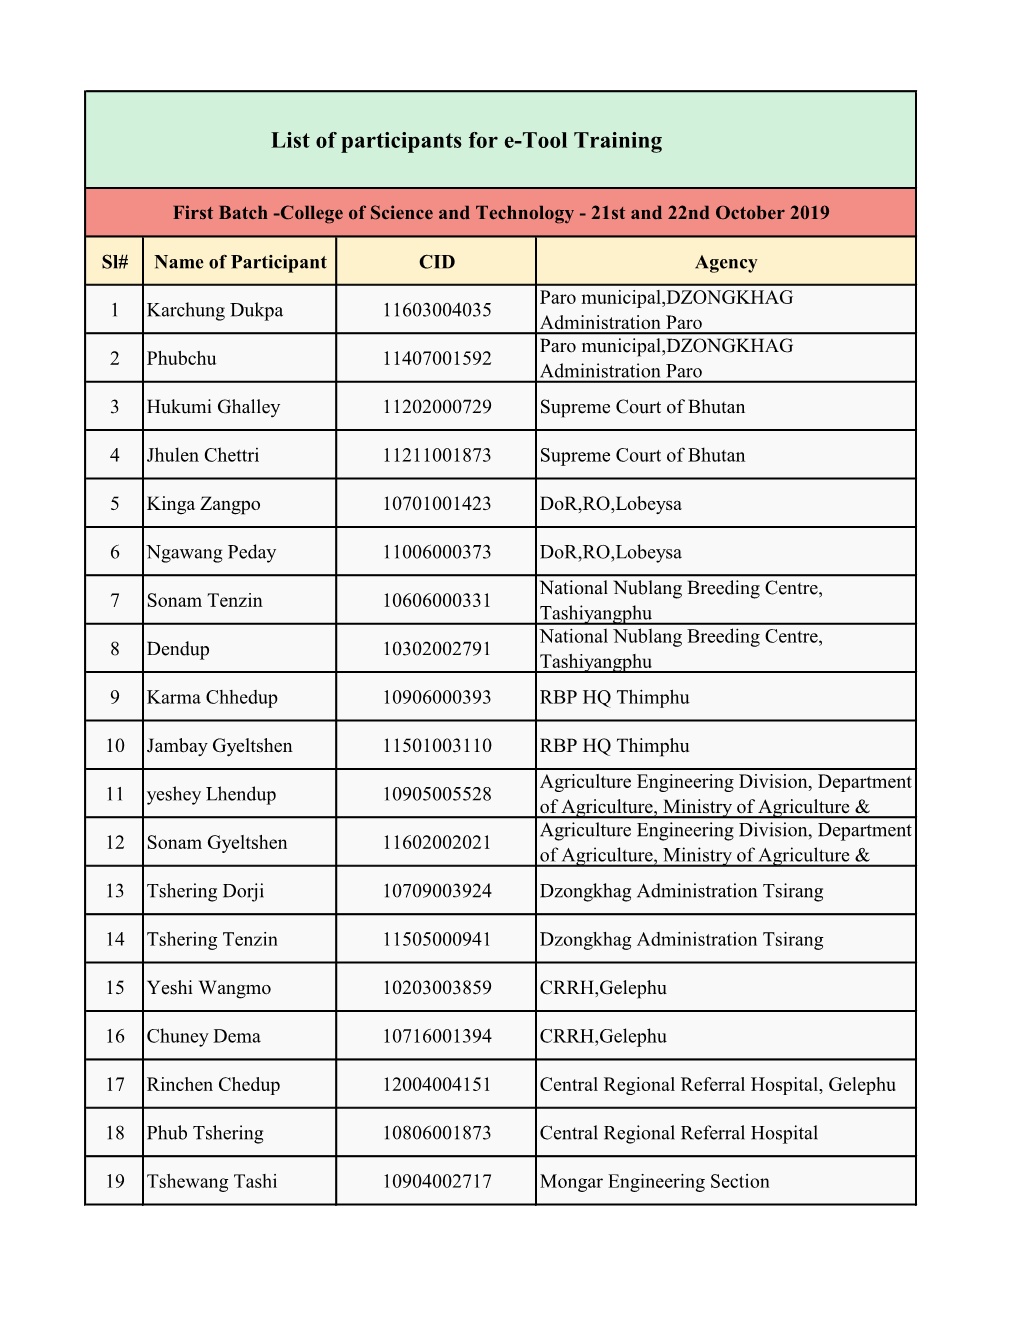 List of Participants for E-Tool Training